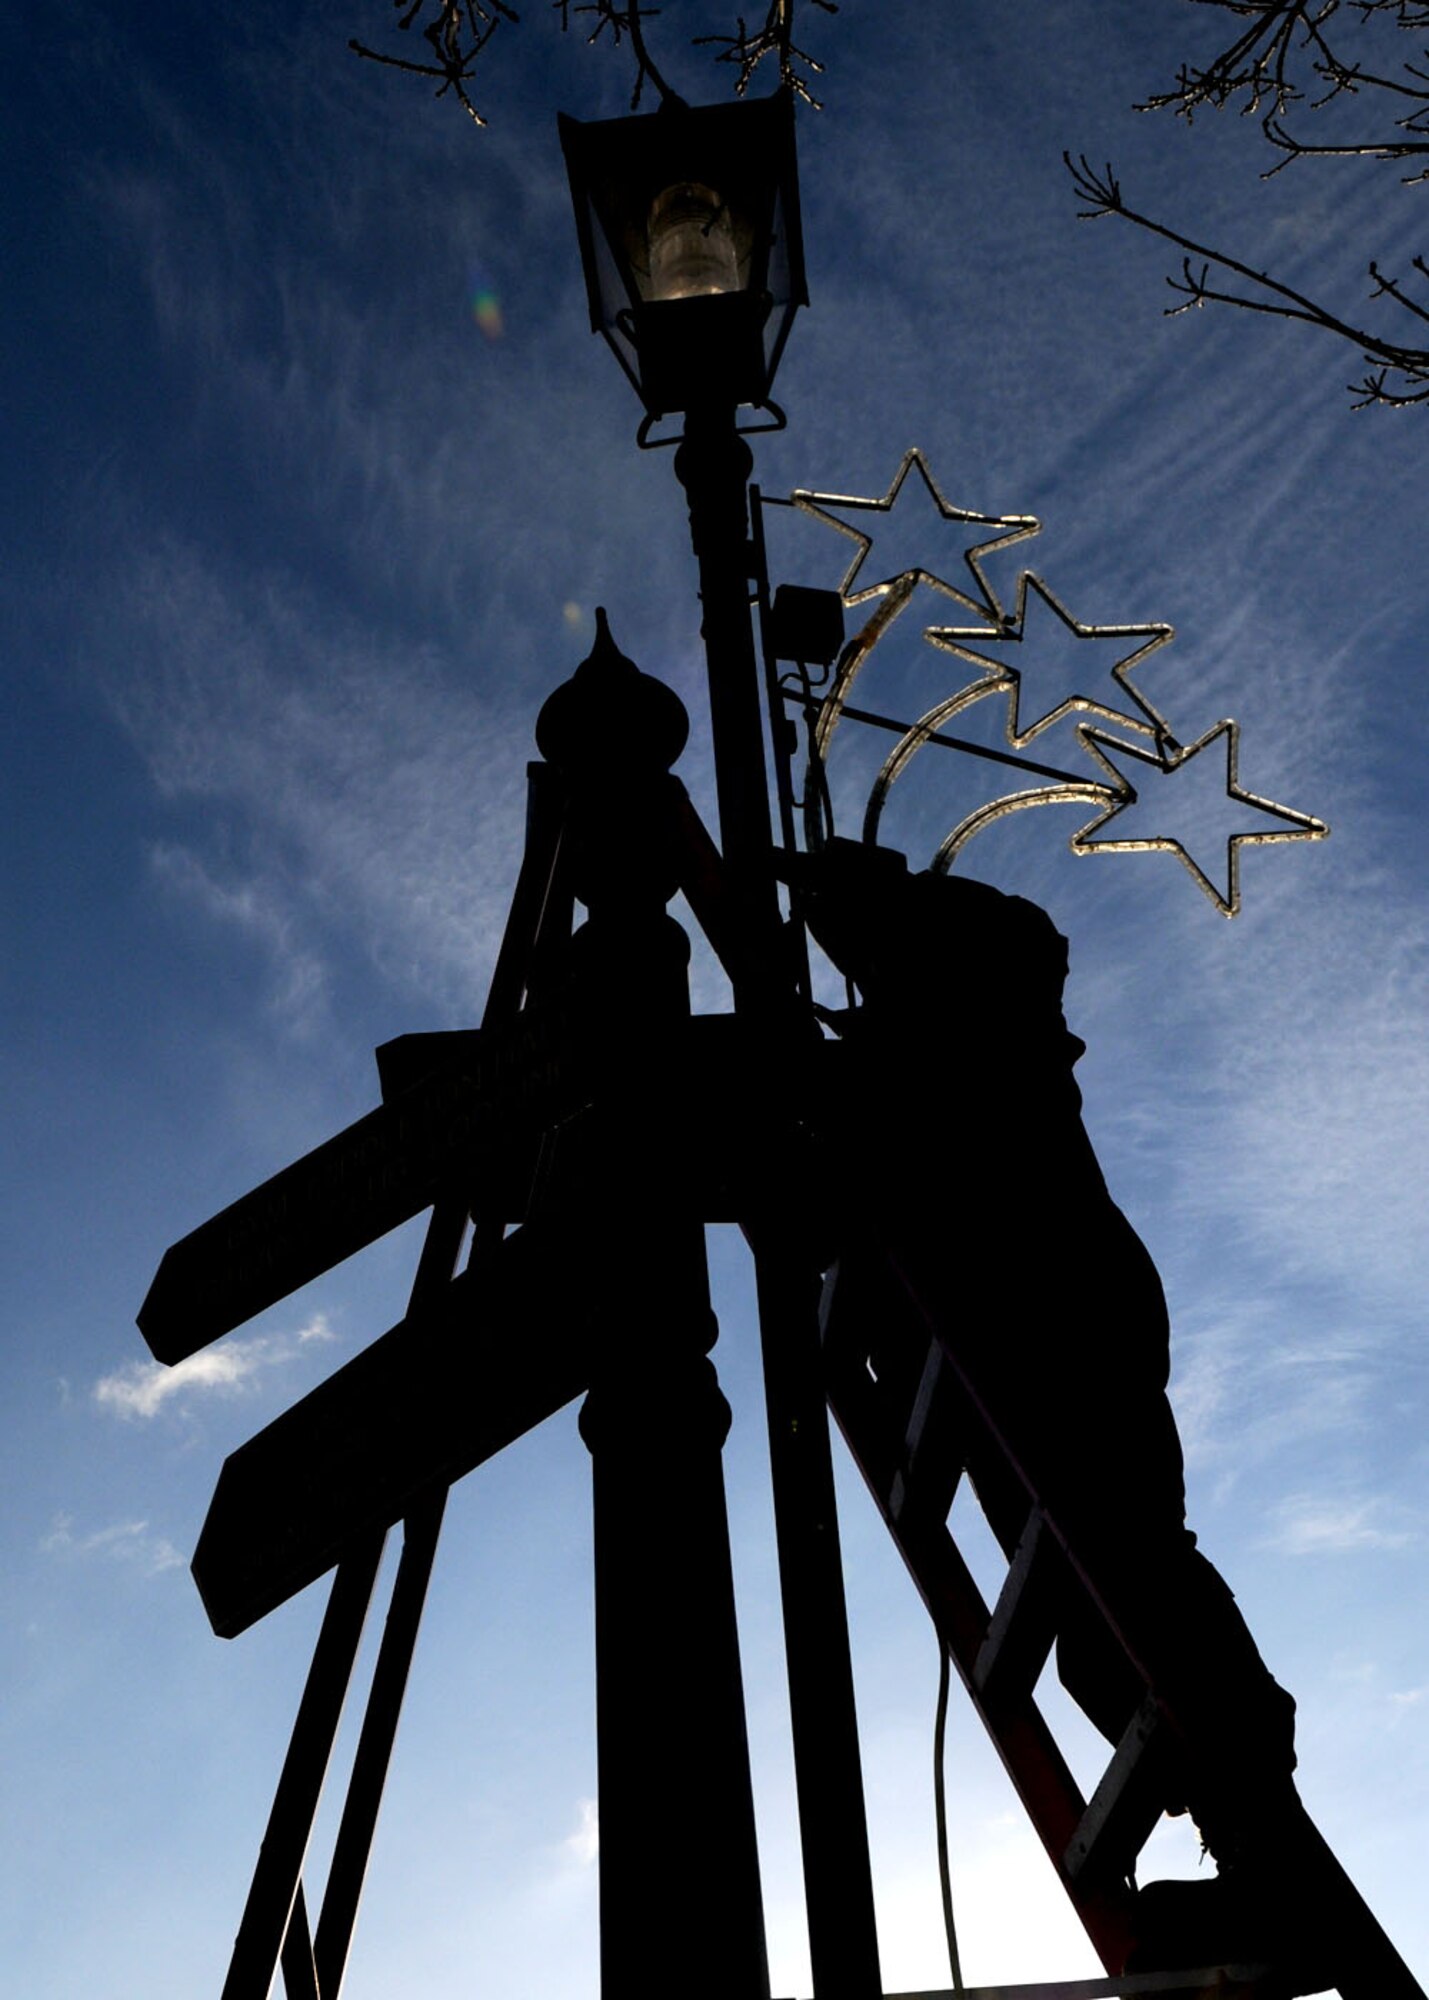 Staff Sgt. Rafeeq Jordan, an electrical systems craftsman from the 100th Civil Engineer Squadron, attaches star-shaped holiday lighting to streetlights throughout RAF Mildenhall Nov. 18, 2008 in preparation for the holiday season at RAF Mildenhall, England. After all holiday preparations are complete, there will be a Christmas tree lighting ceremony Dec. 4 at 4:30 p.m., adjacent to building 422 (opposite Mickey’s Tea Bar). (U.S. Air Force photo by Staff Sgt. Jerry Fleshman)